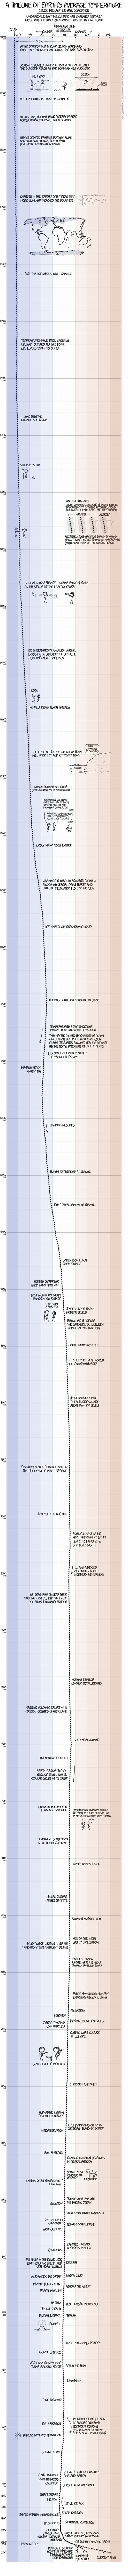 [Image: earth_temperature_timeline_2x.png]